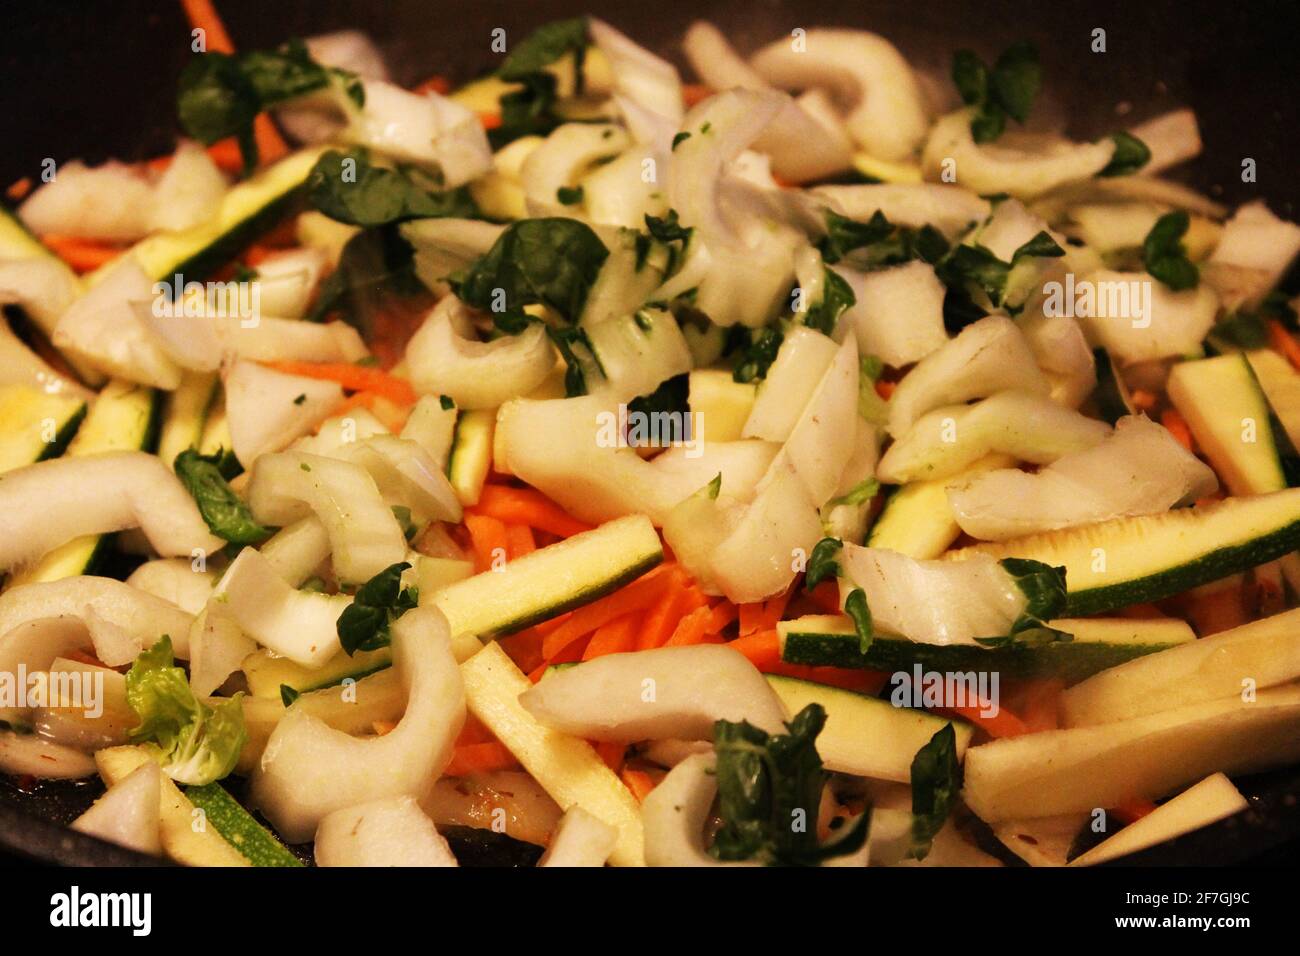 Close-up of a pile of chopped vegetables, including carrot, onion, Bok choy, celery. Stock Photo